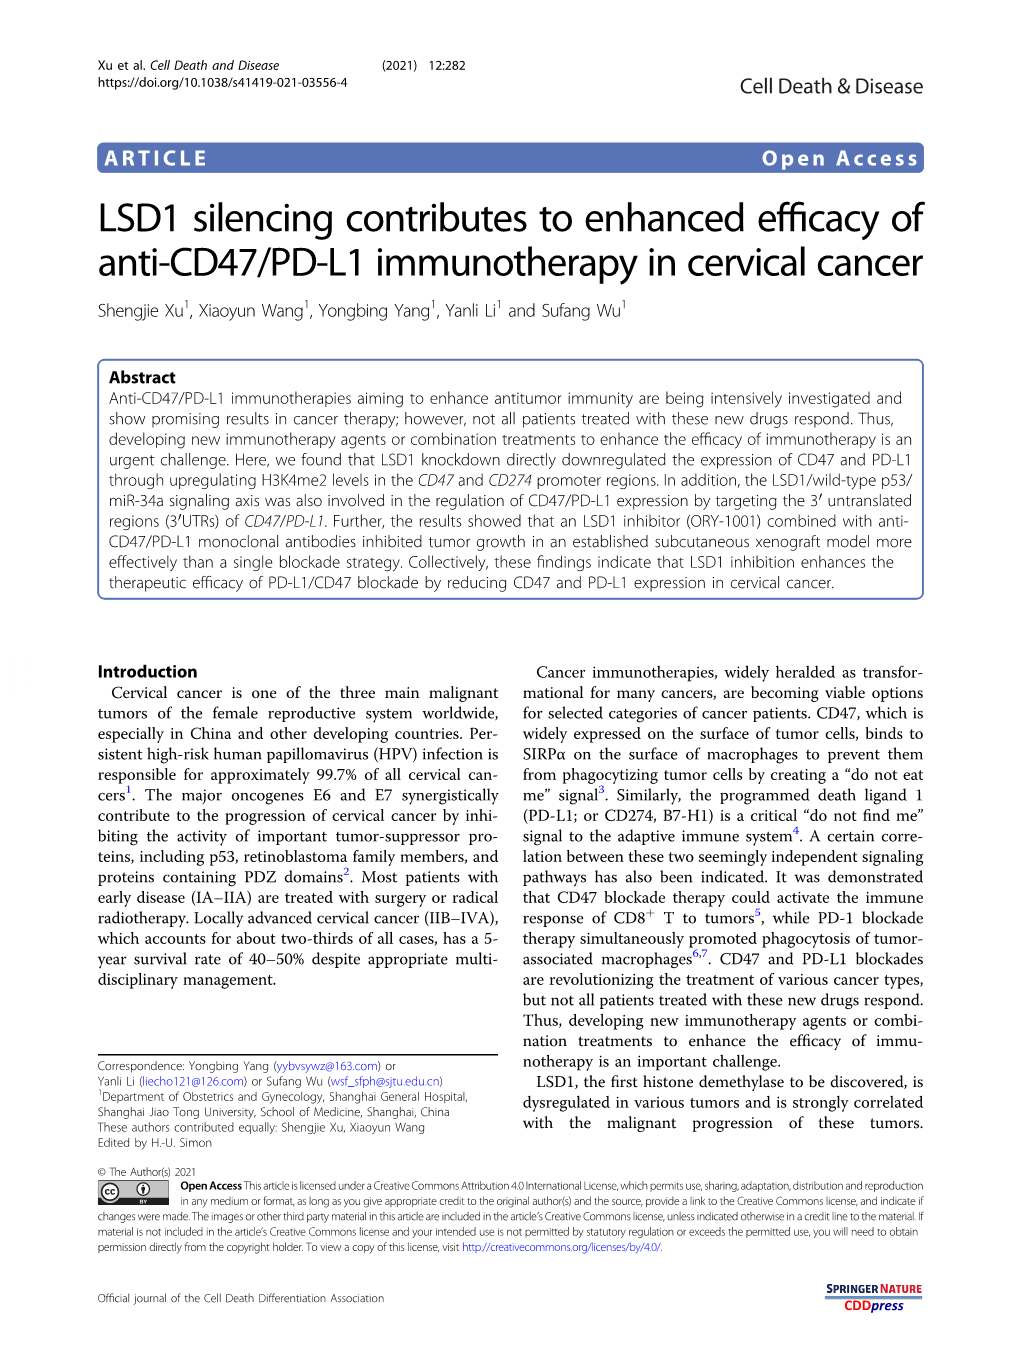 LSD1 Silencing Contributes to Enhanced Efficacy of Anti-CD47/PD